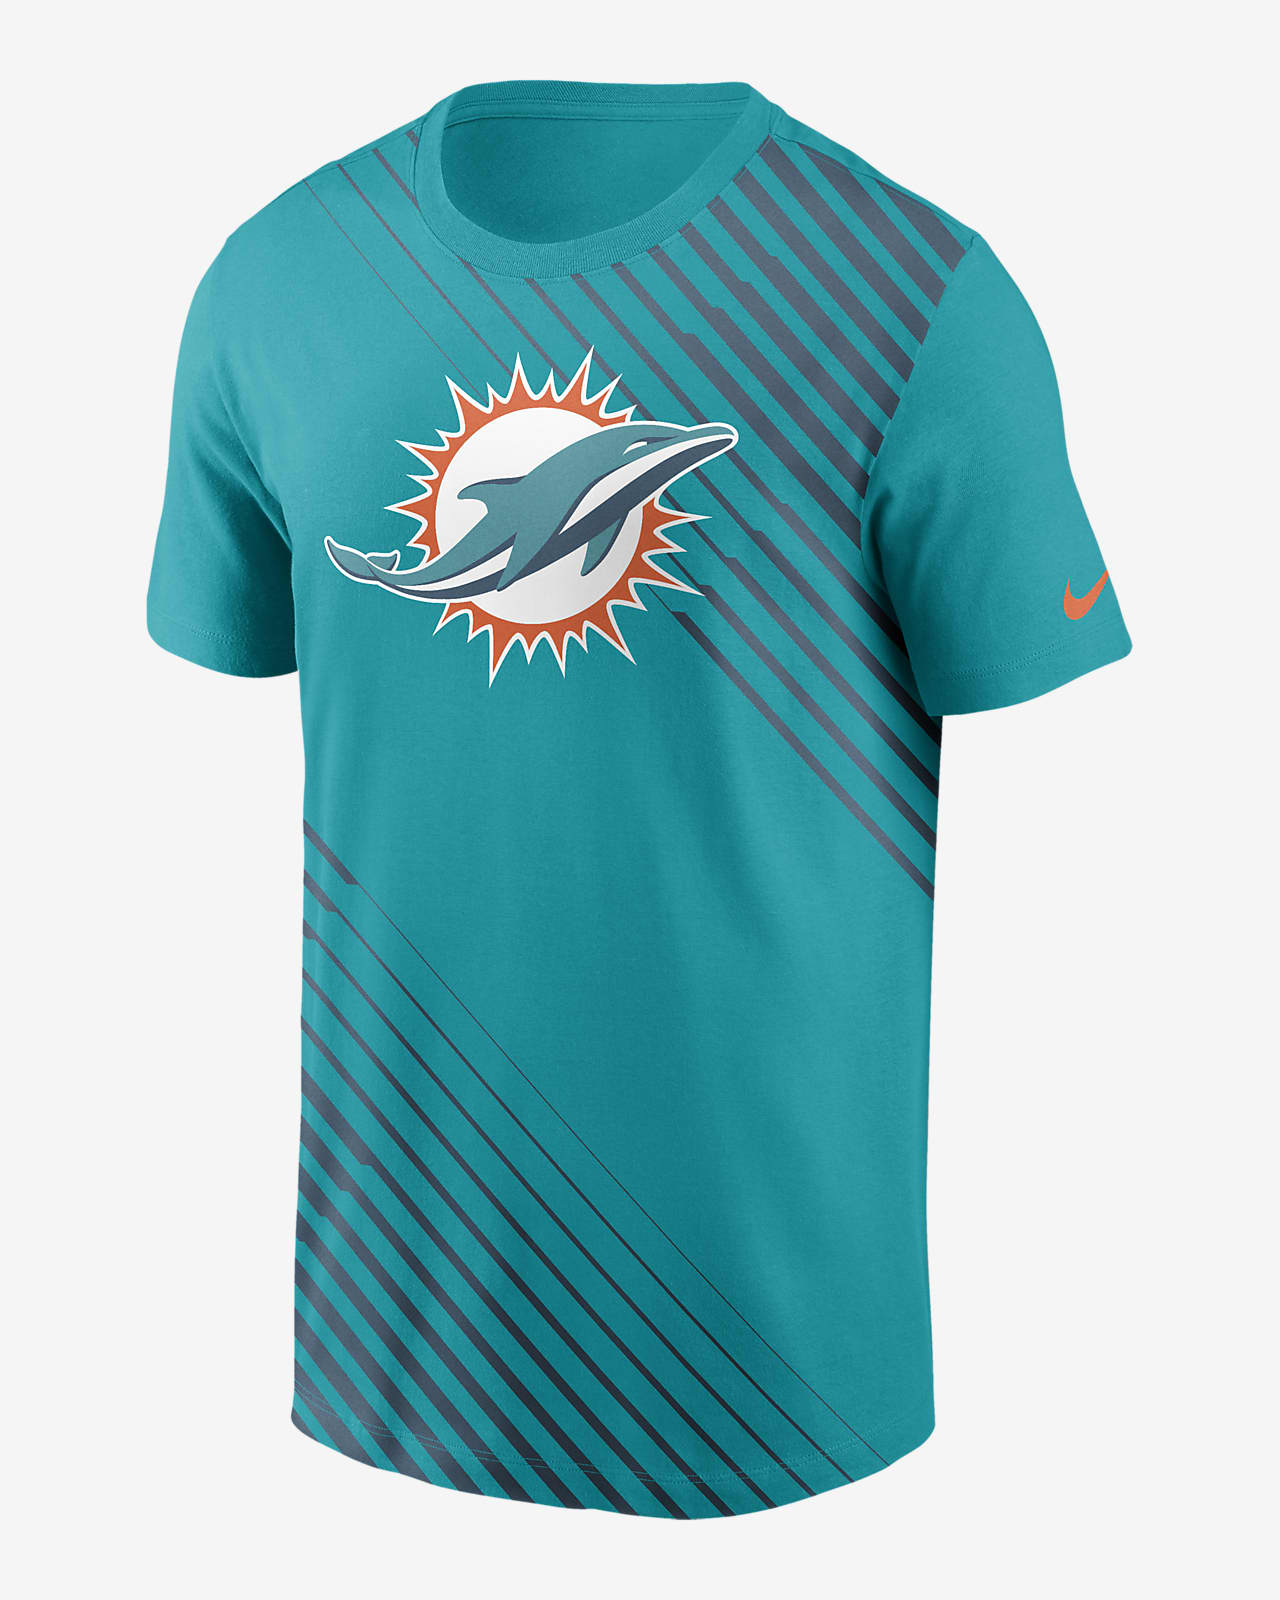 Nike Men's Yard Line (NFL Miami Dolphins) T-Shirt in Green, Size: Large | NKGW3GT9P-079